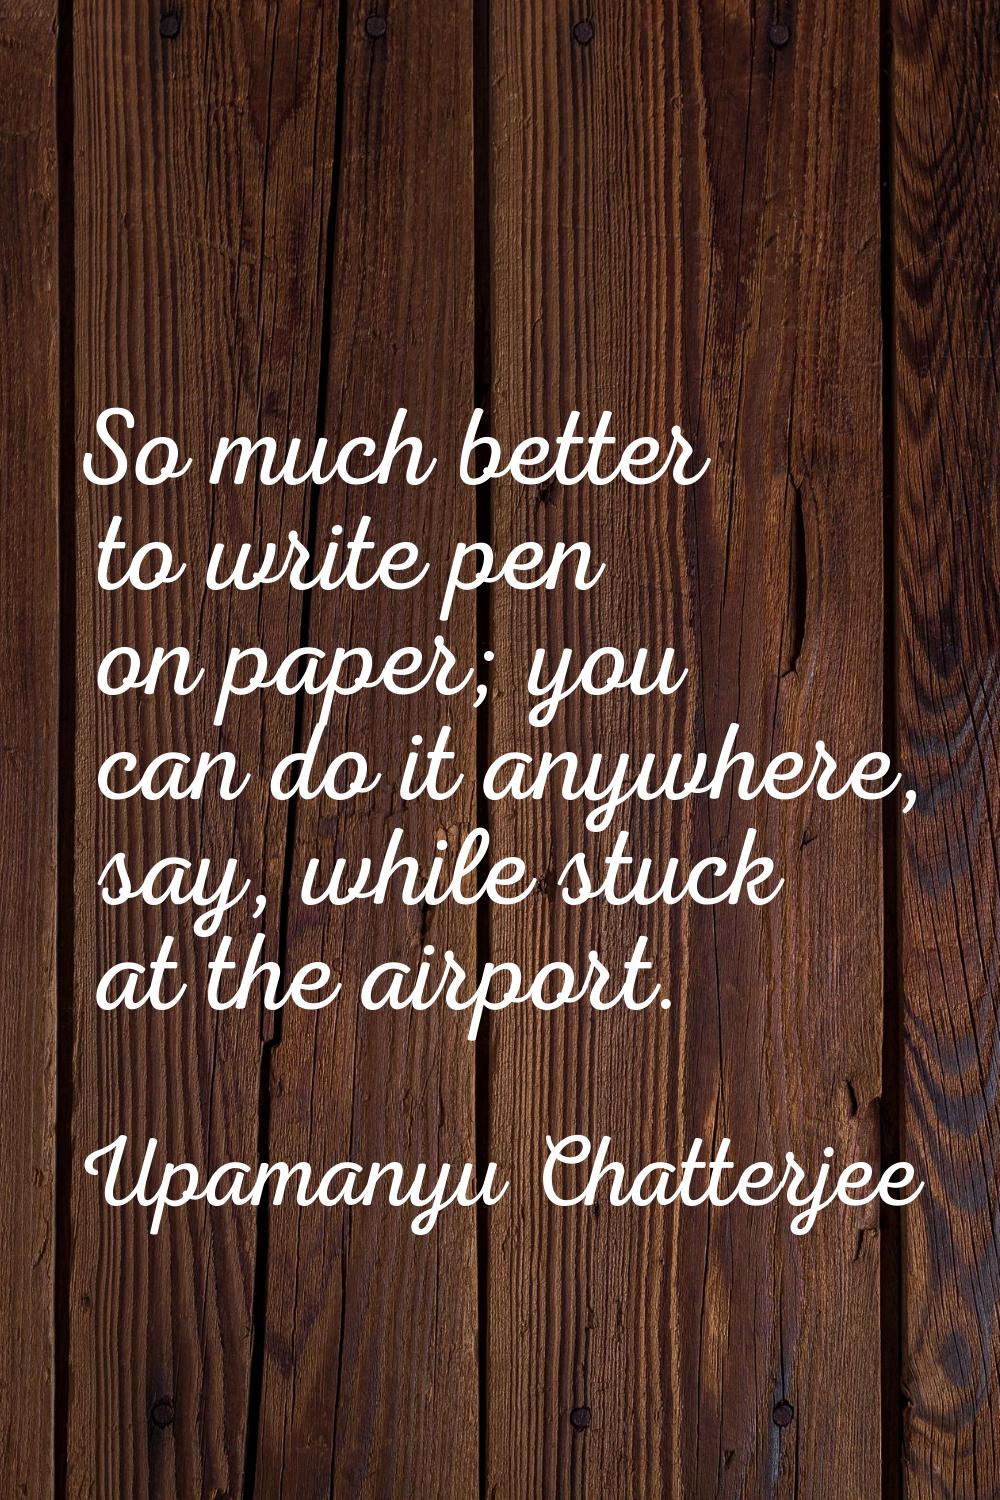 So much better to write pen on paper; you can do it anywhere, say, while stuck at the airport.